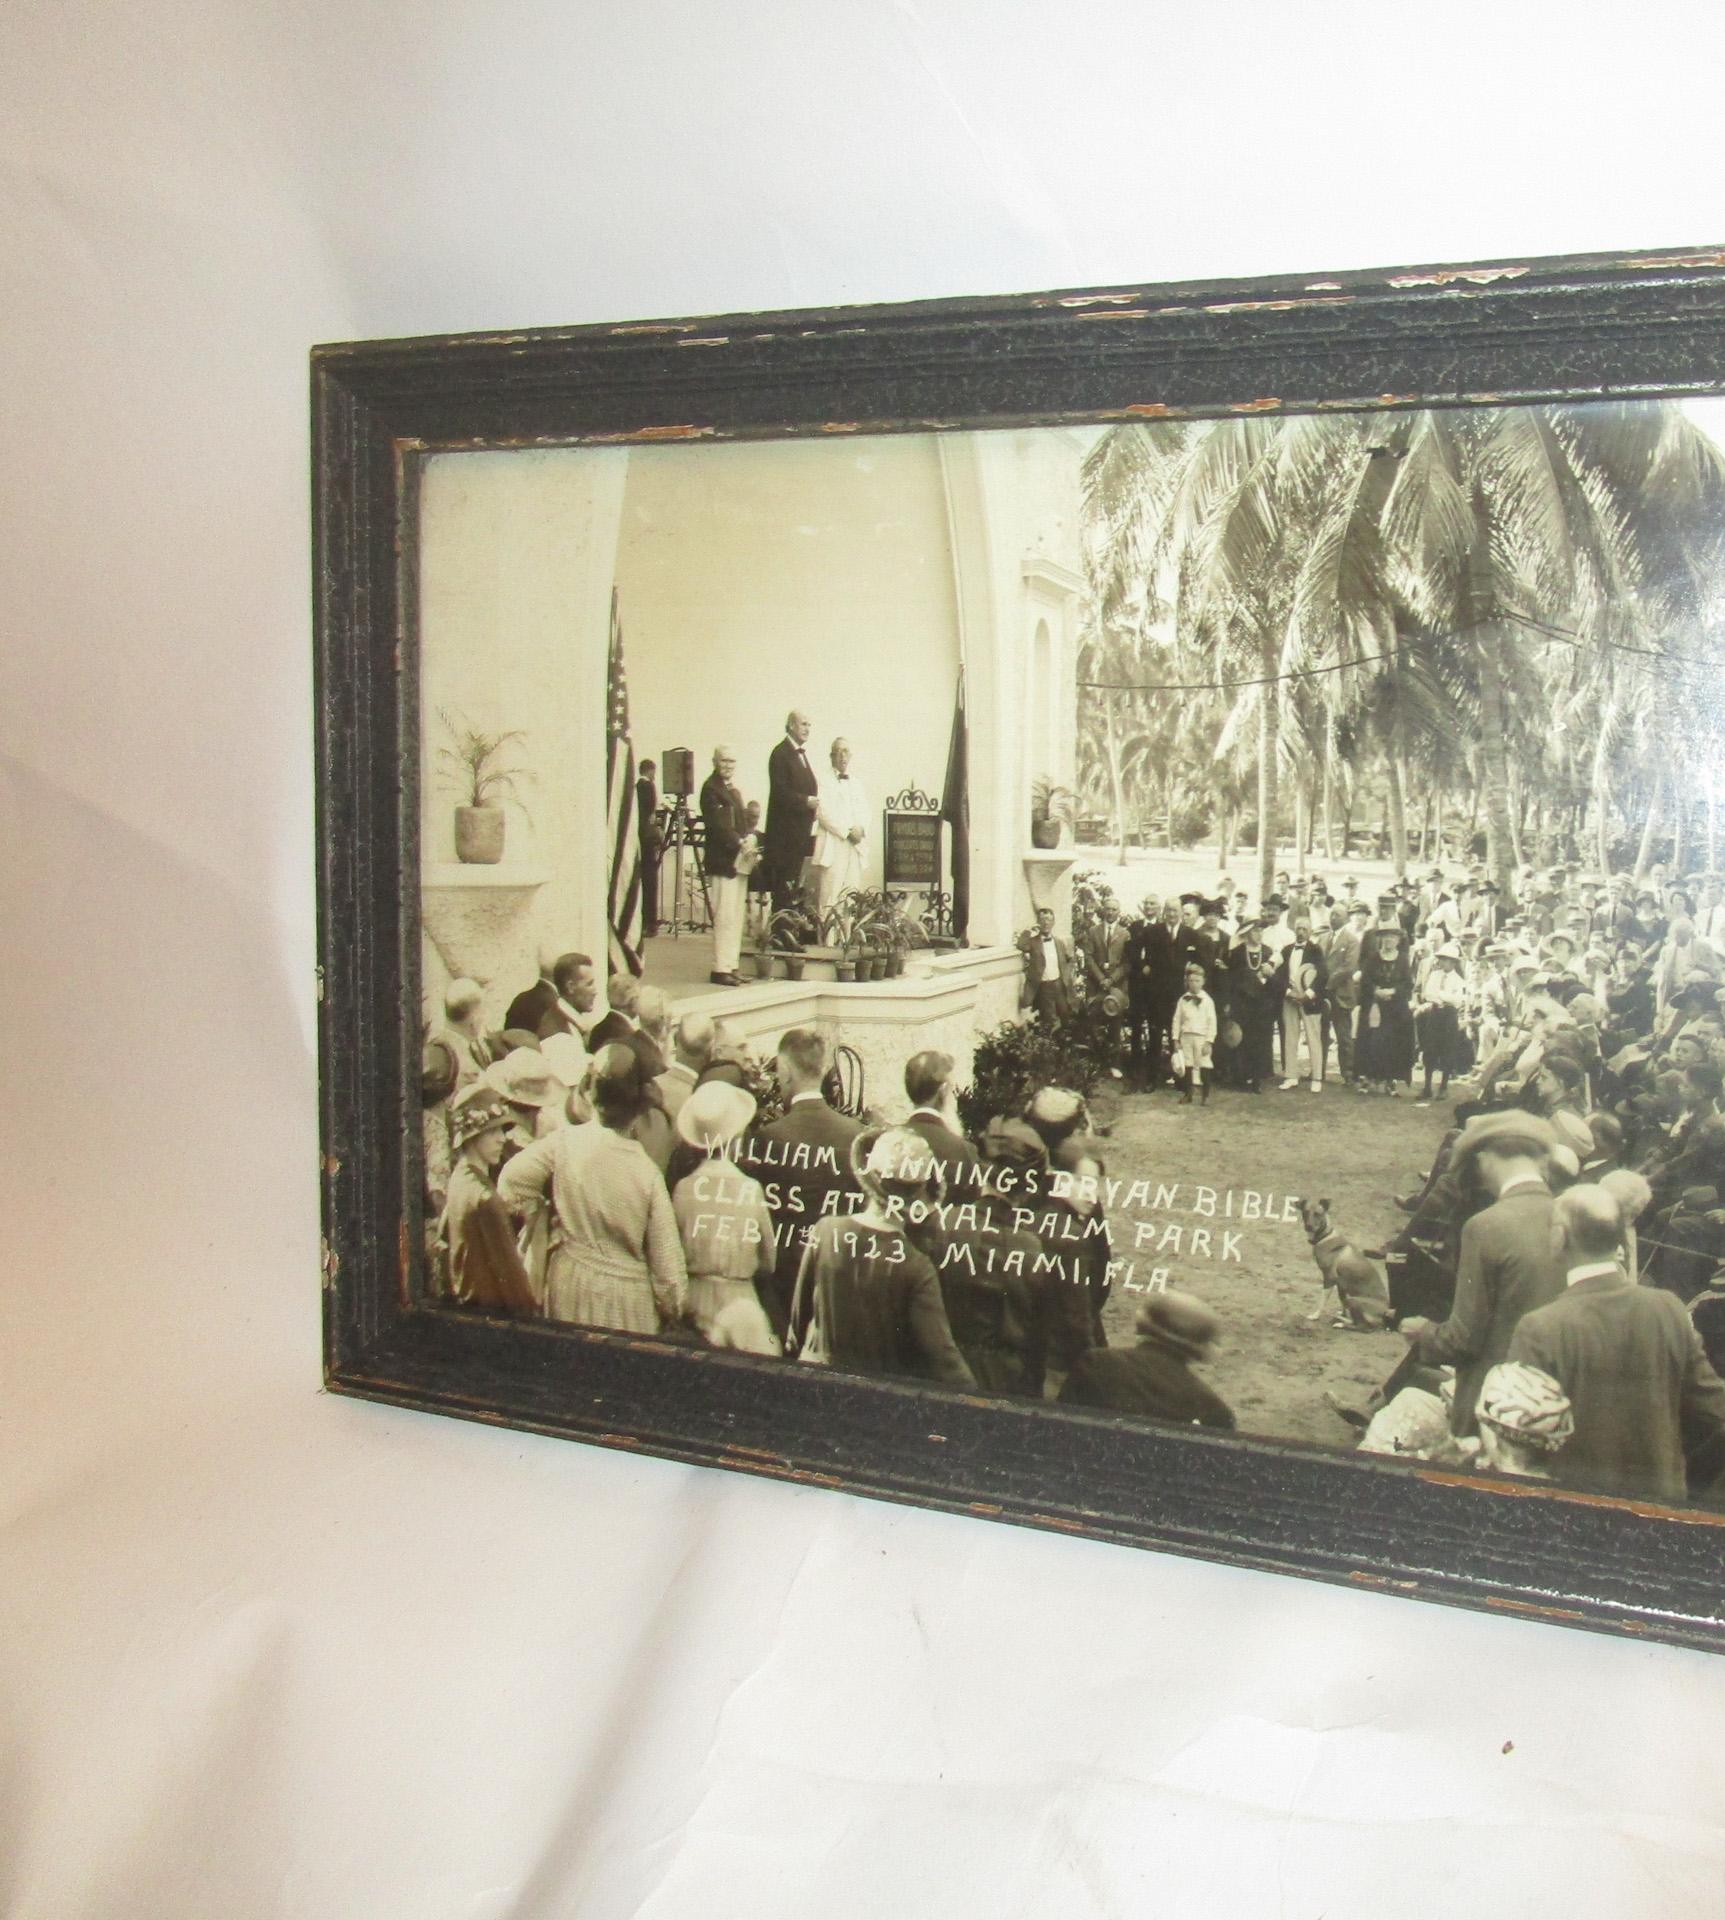 Unusually large framed panorama photograph by known photographer H. B. Thrasher (1884-1927.) Historically significant, pictured is William Jennings Bryan speaking to a large group of people attending a bible conference at the famous Florida hotel.